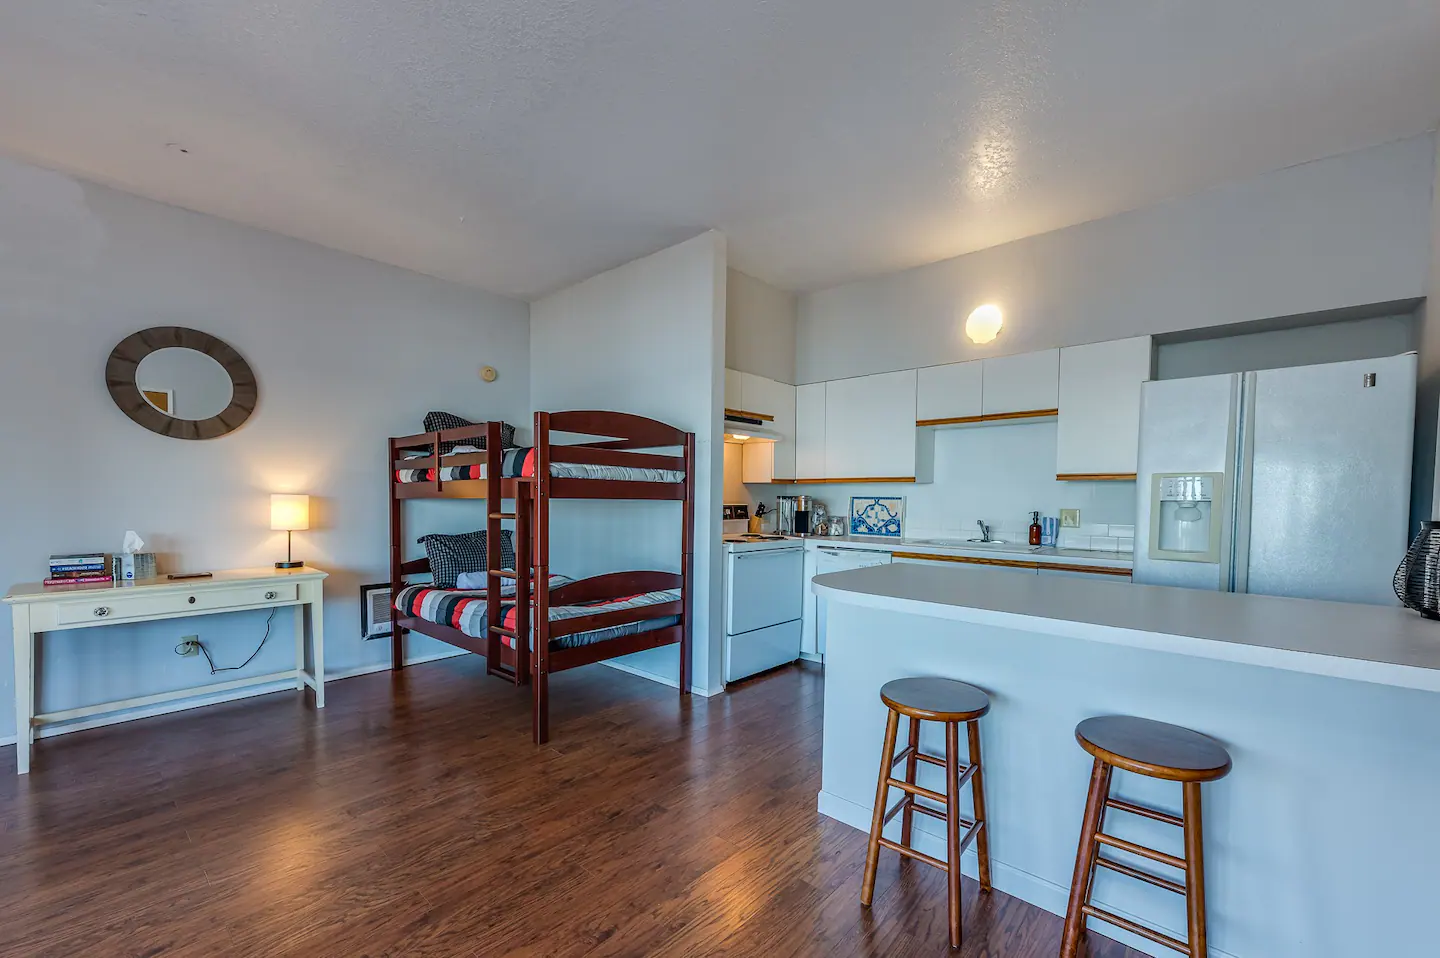 Separate in-law apartment has a bunk bed, writing desk, full kitchen, family room and a master suite with ensuite bath.
